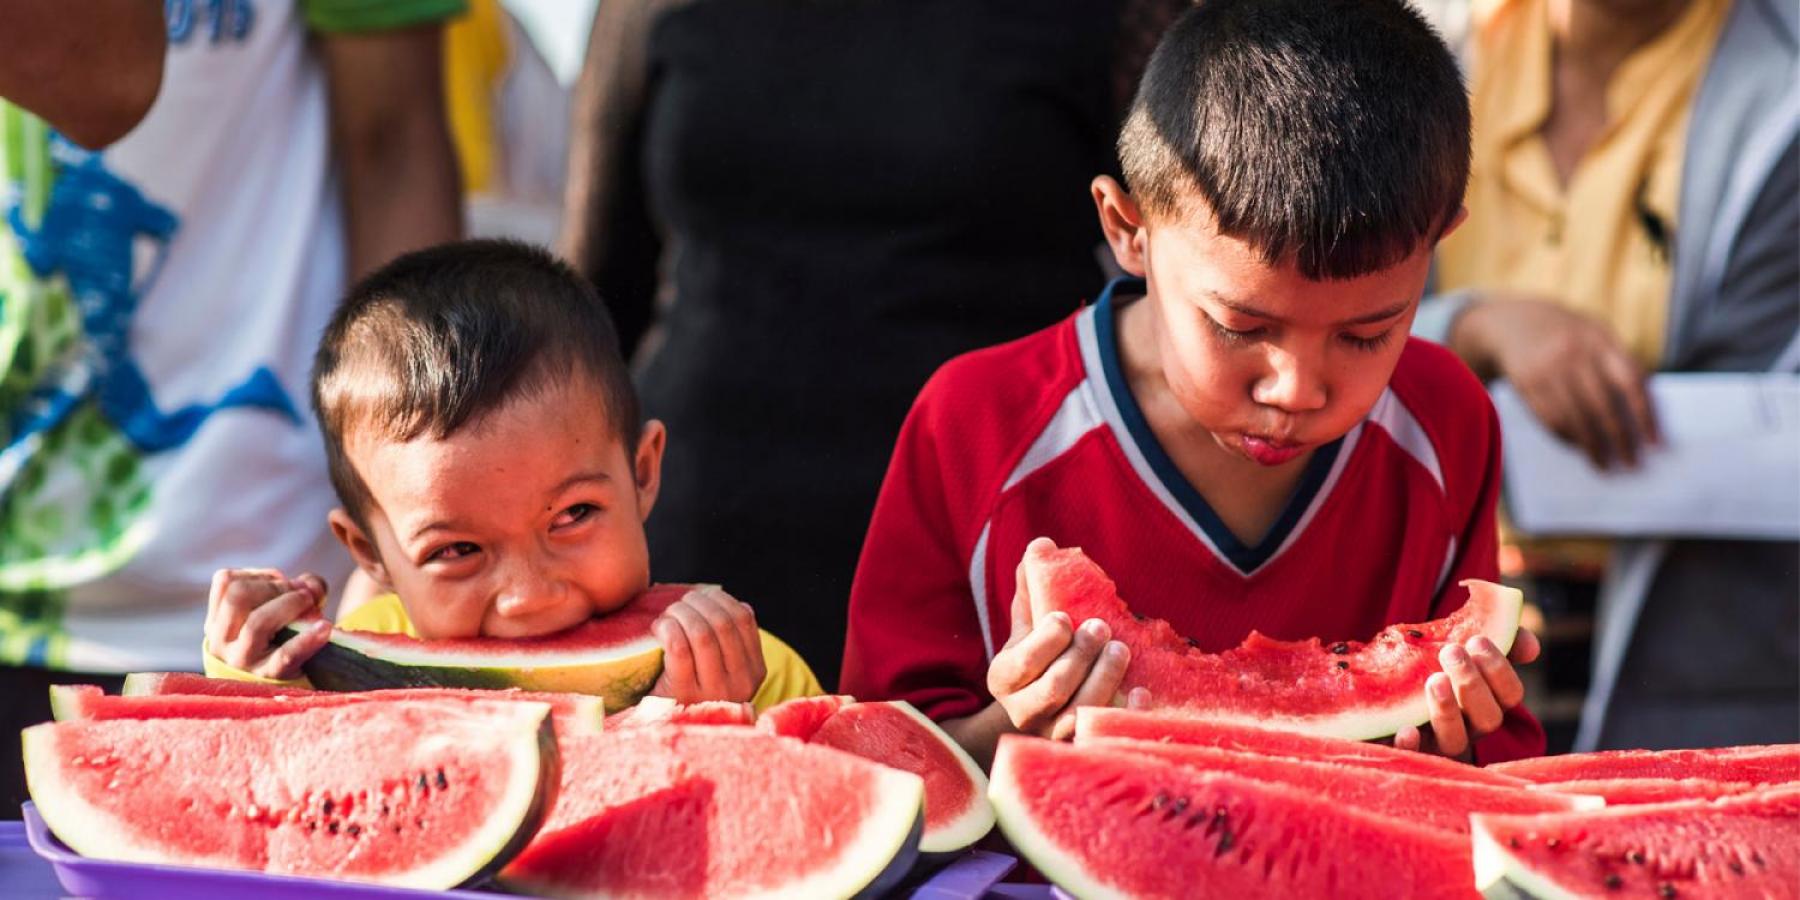 Kids eating a watermelon in Mexico